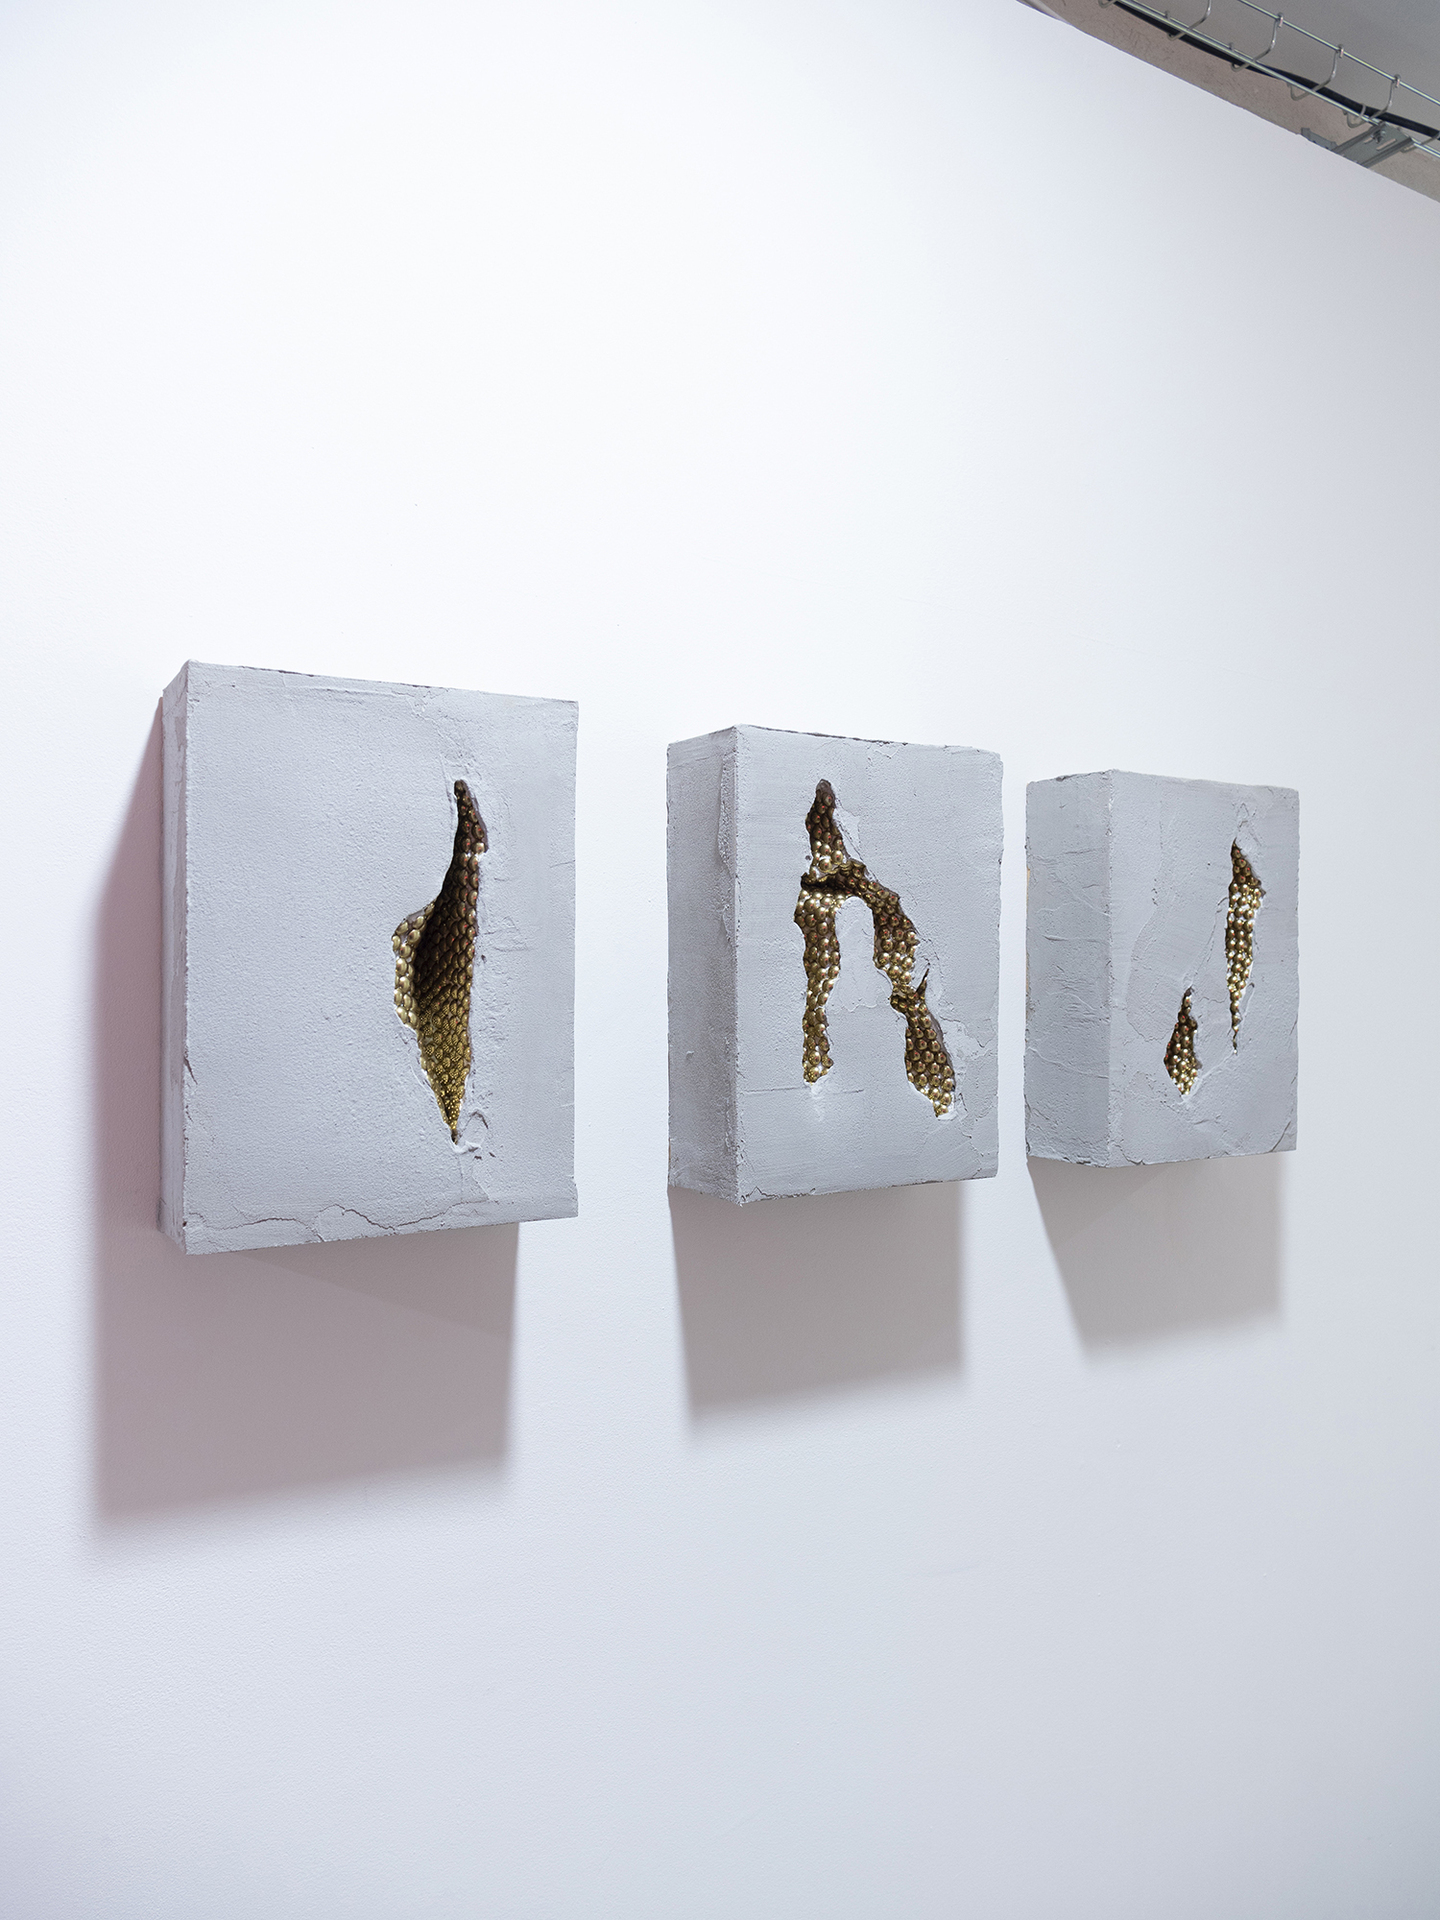 Léo Fourdrinier, light through the veins, 2020,  concrete, brass plated nails, wood, extruded polystyrene, 25 x 34 x 10 cm